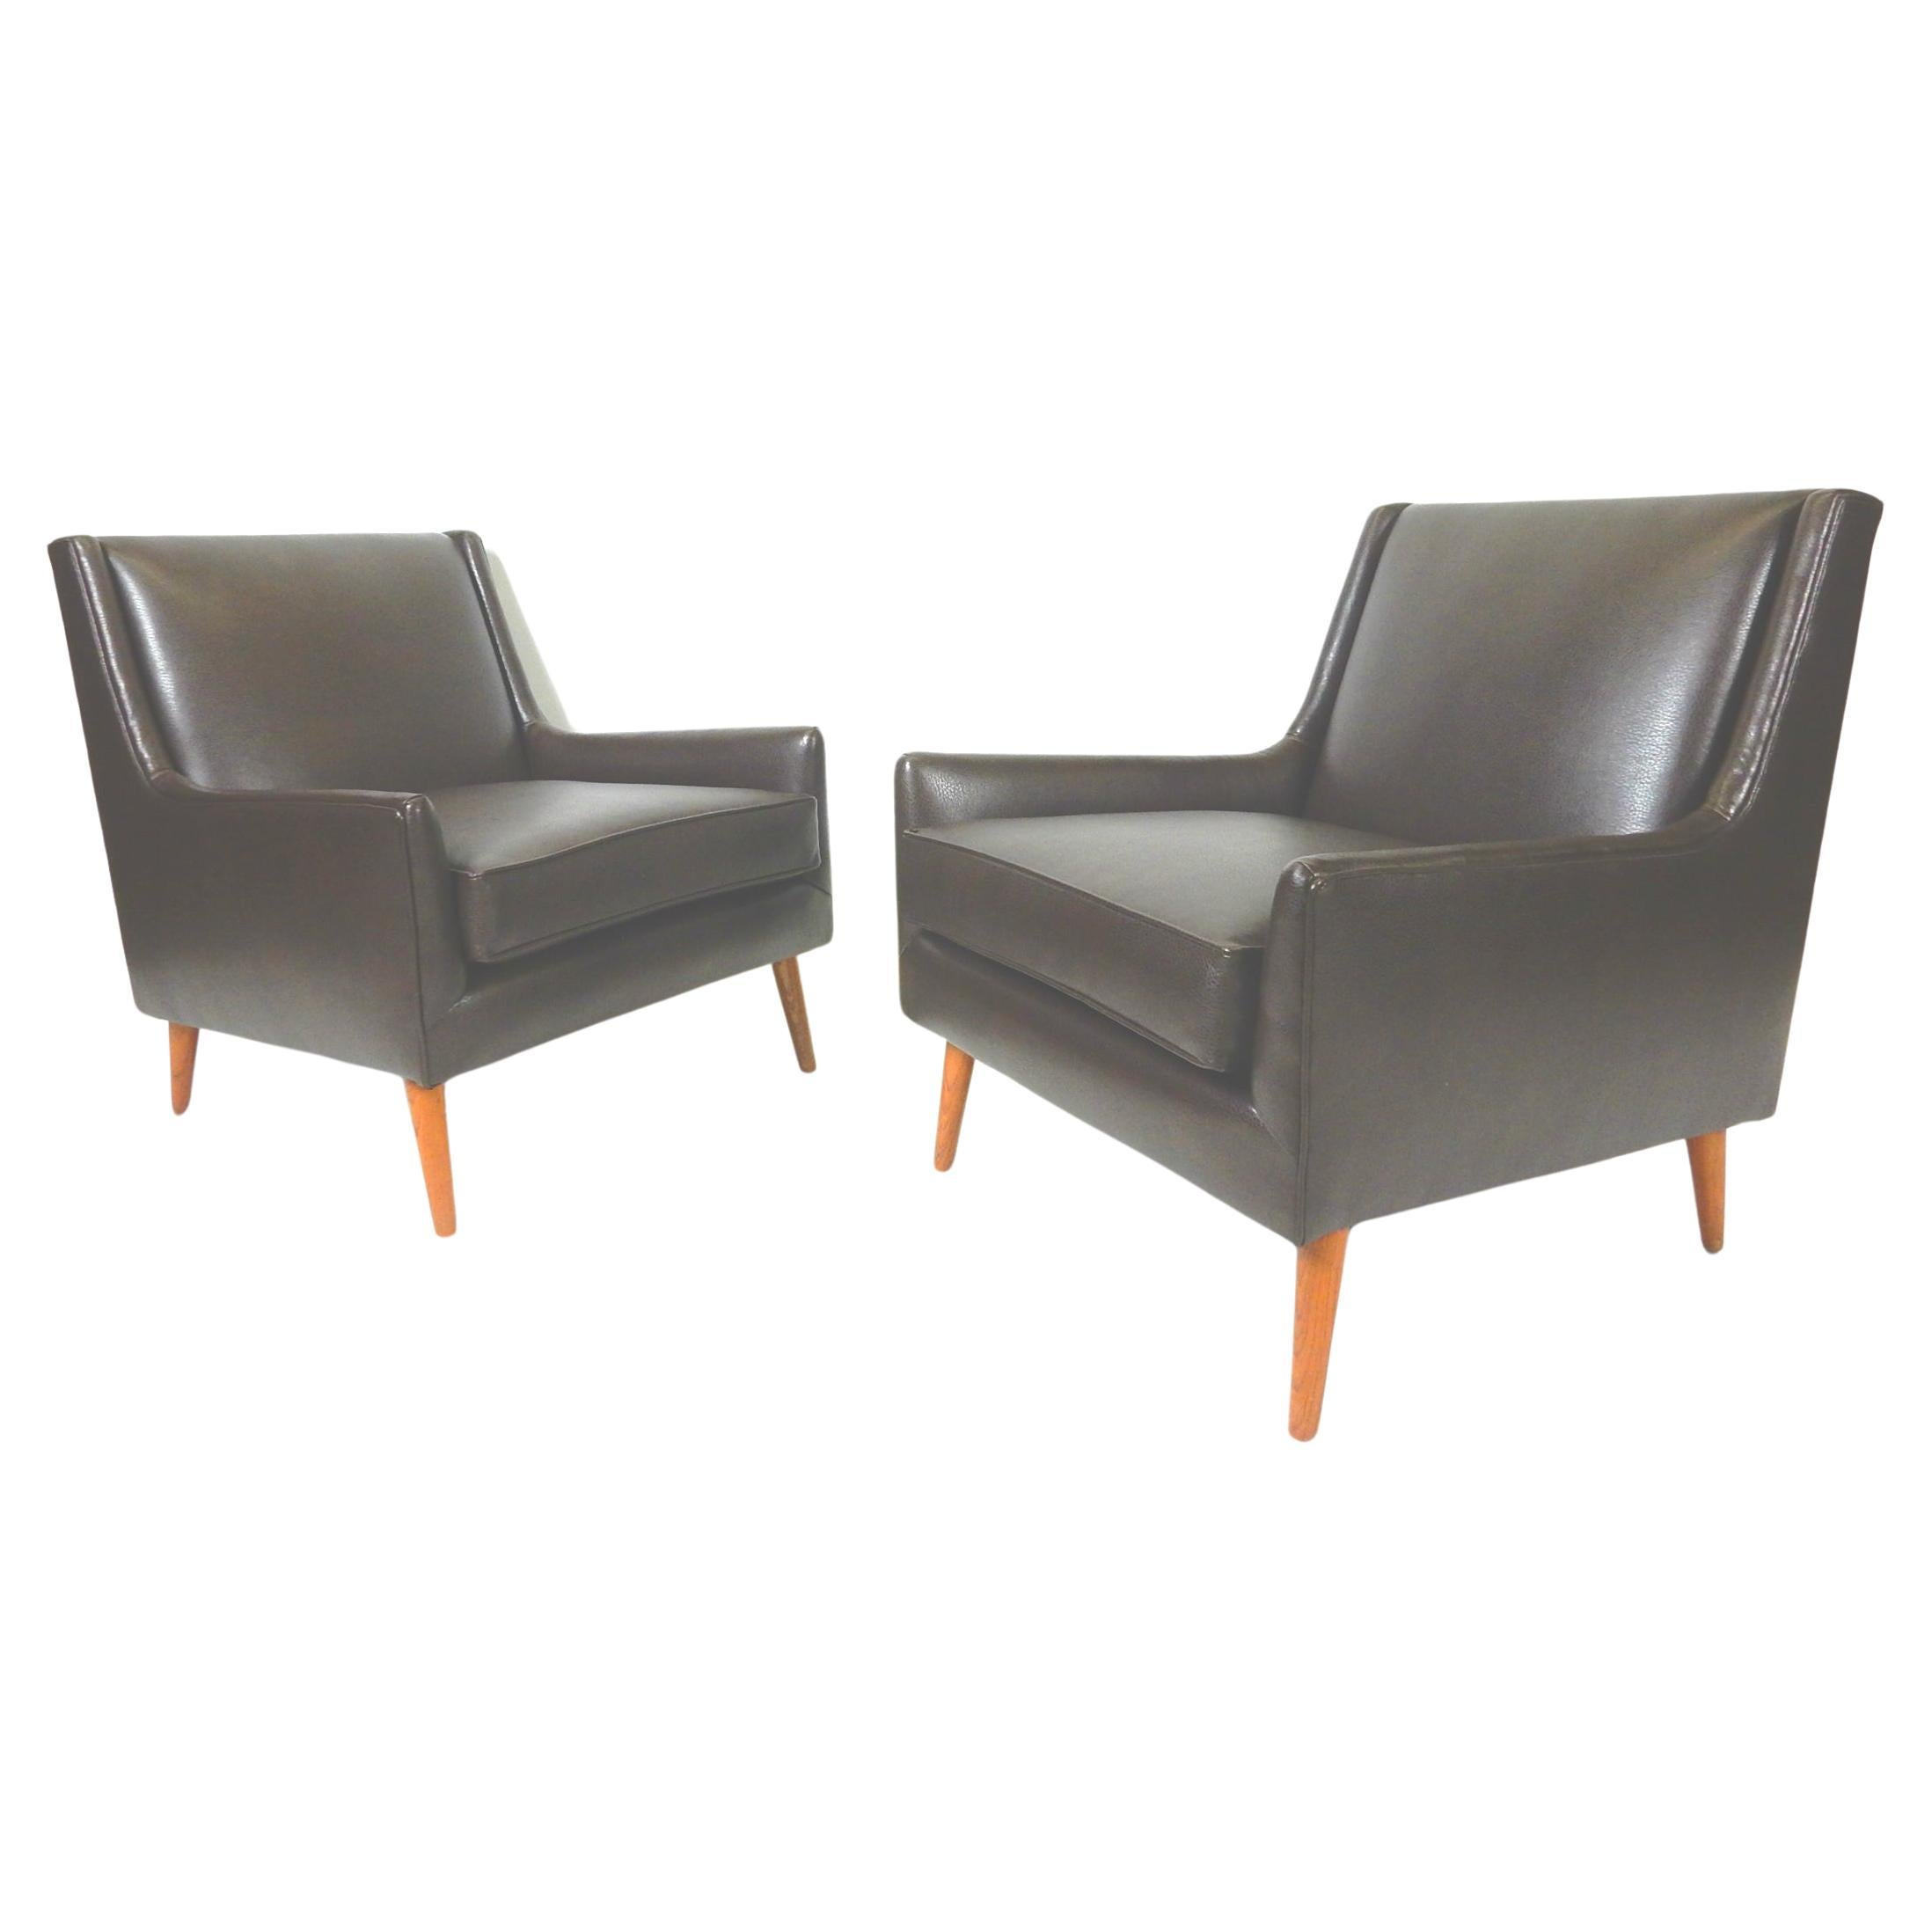 1950s Mid-Century Modern Lounge Chair Pair For Sale 2